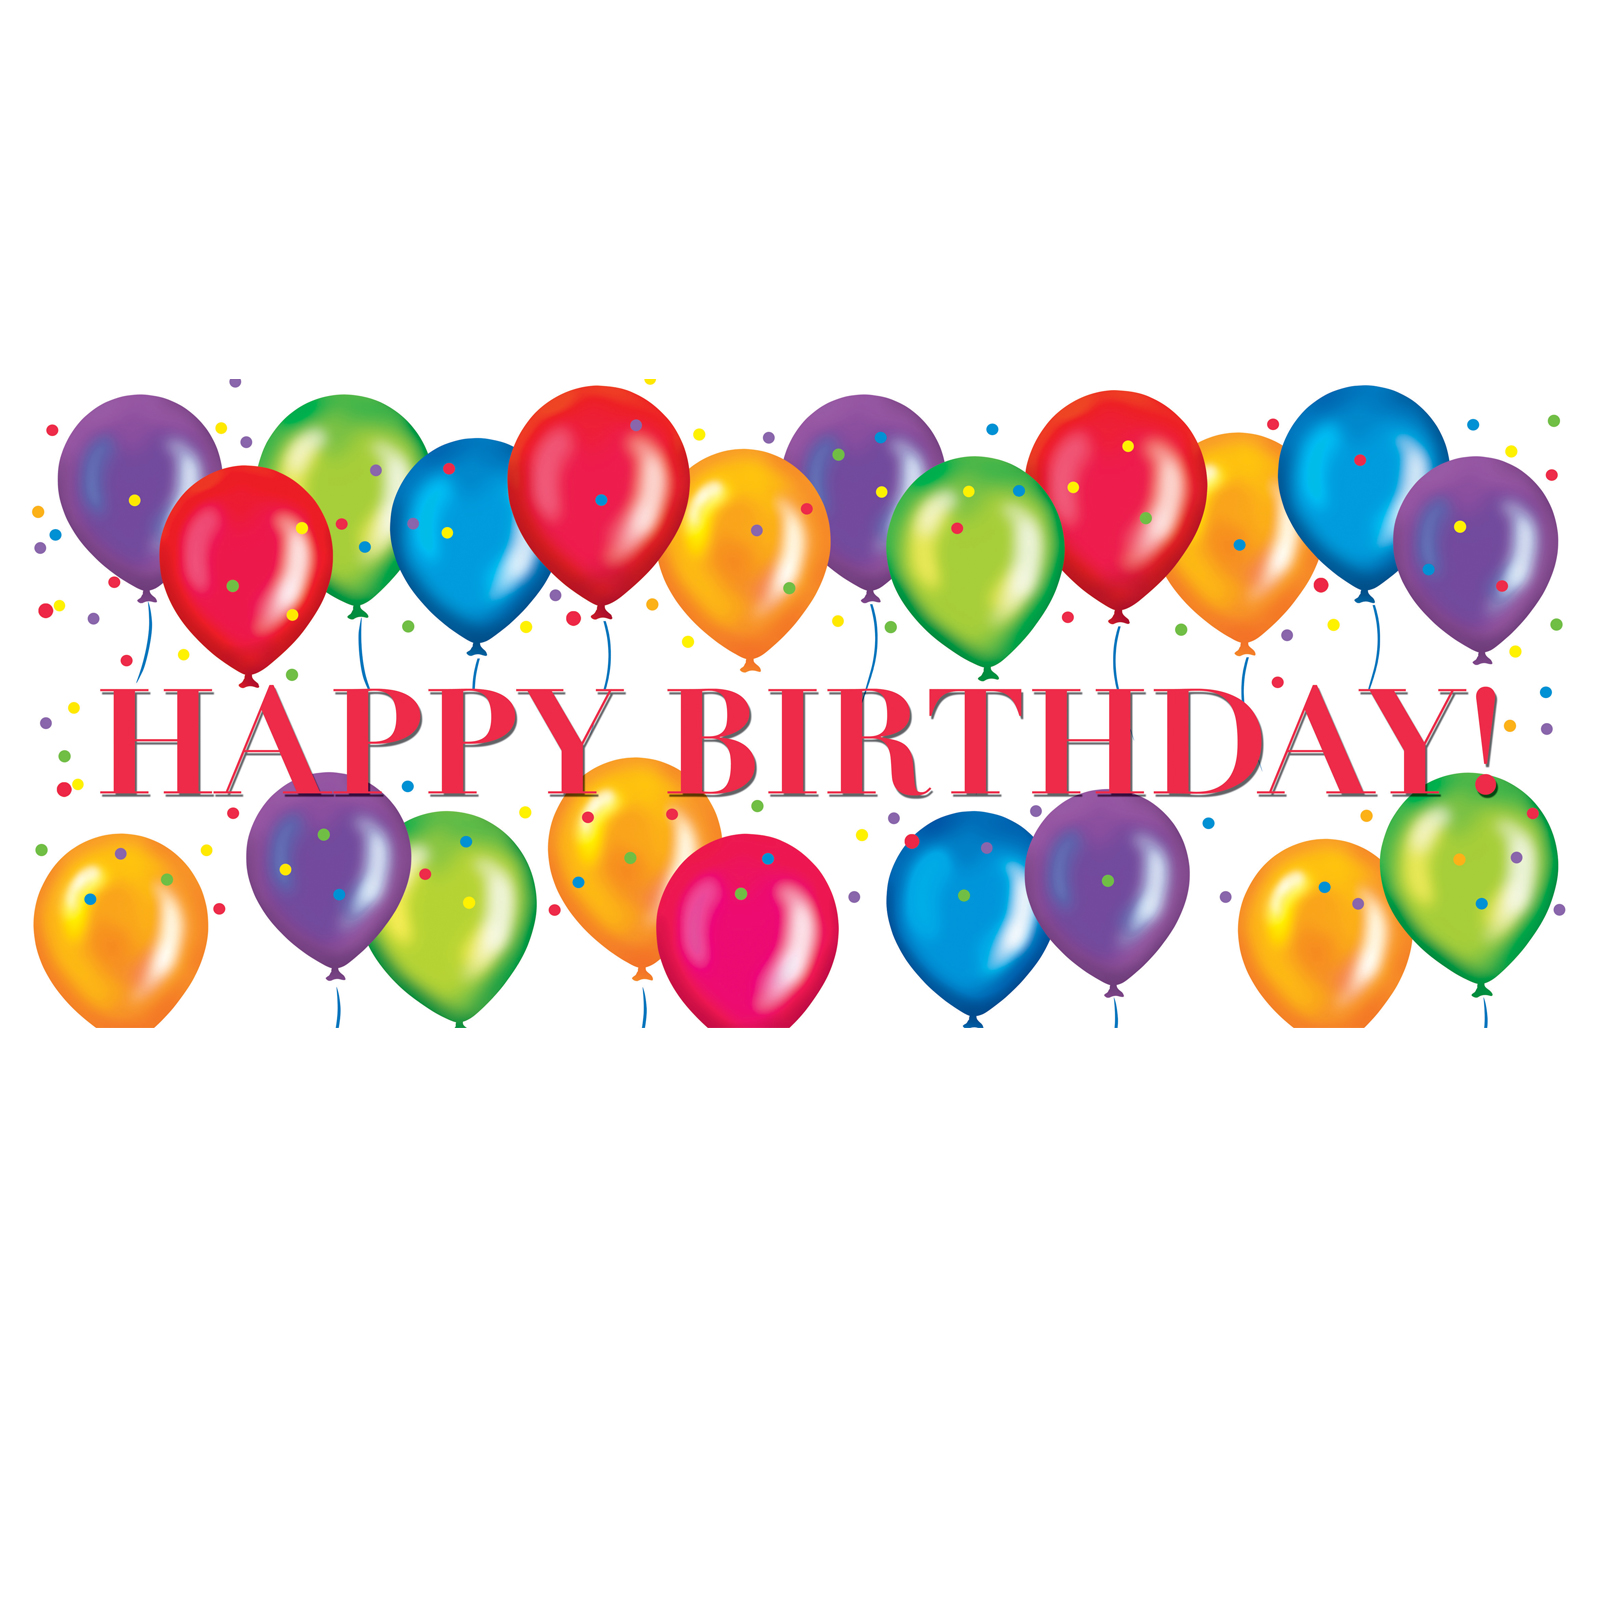 clipart birthday images free - photo #41